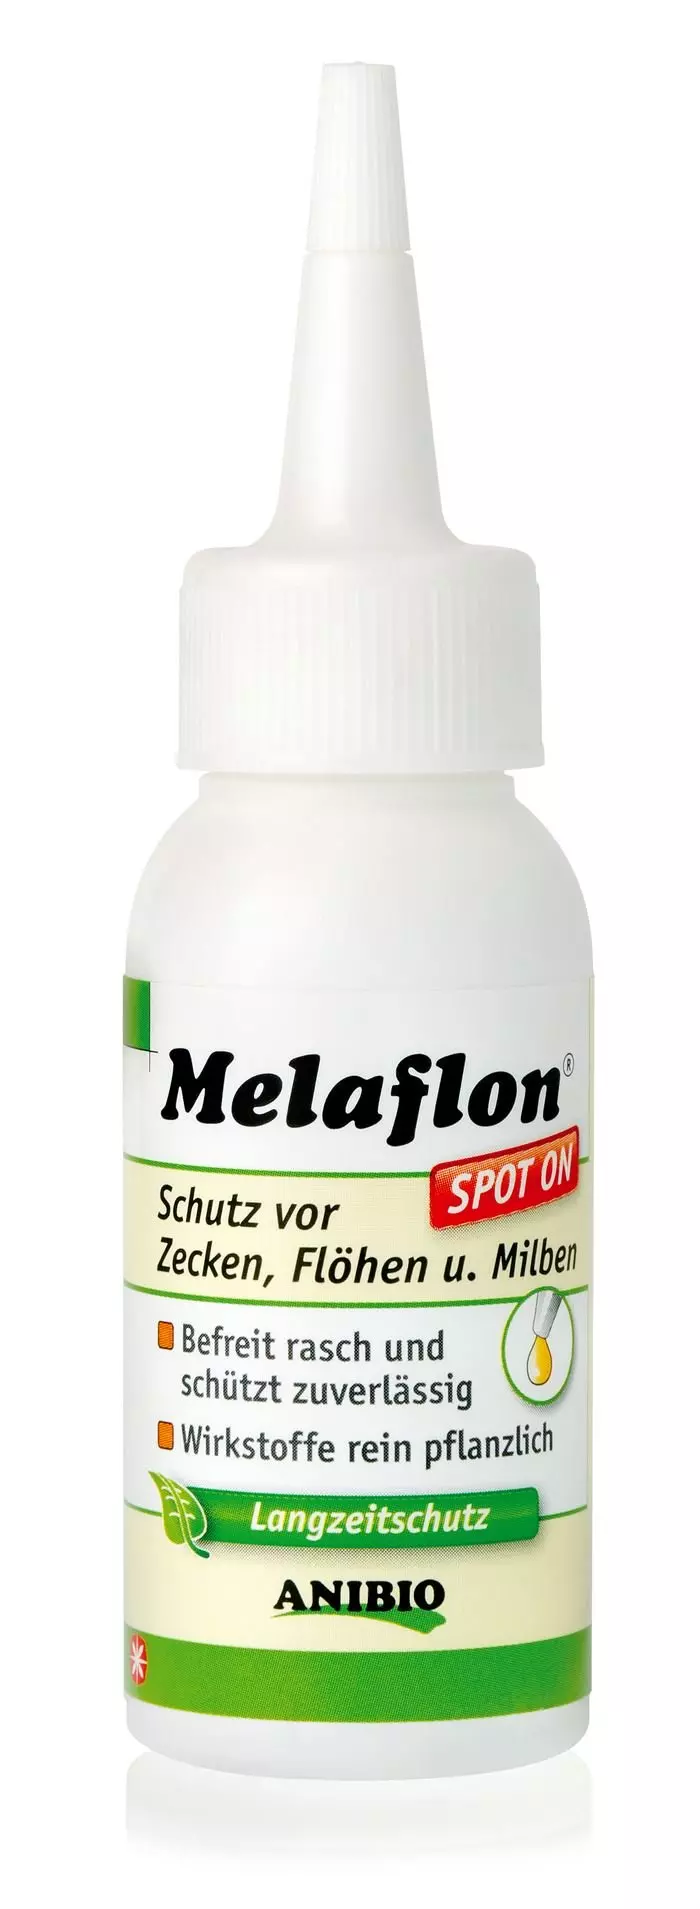 Anibio Melaflon Spot-On For Dogs And